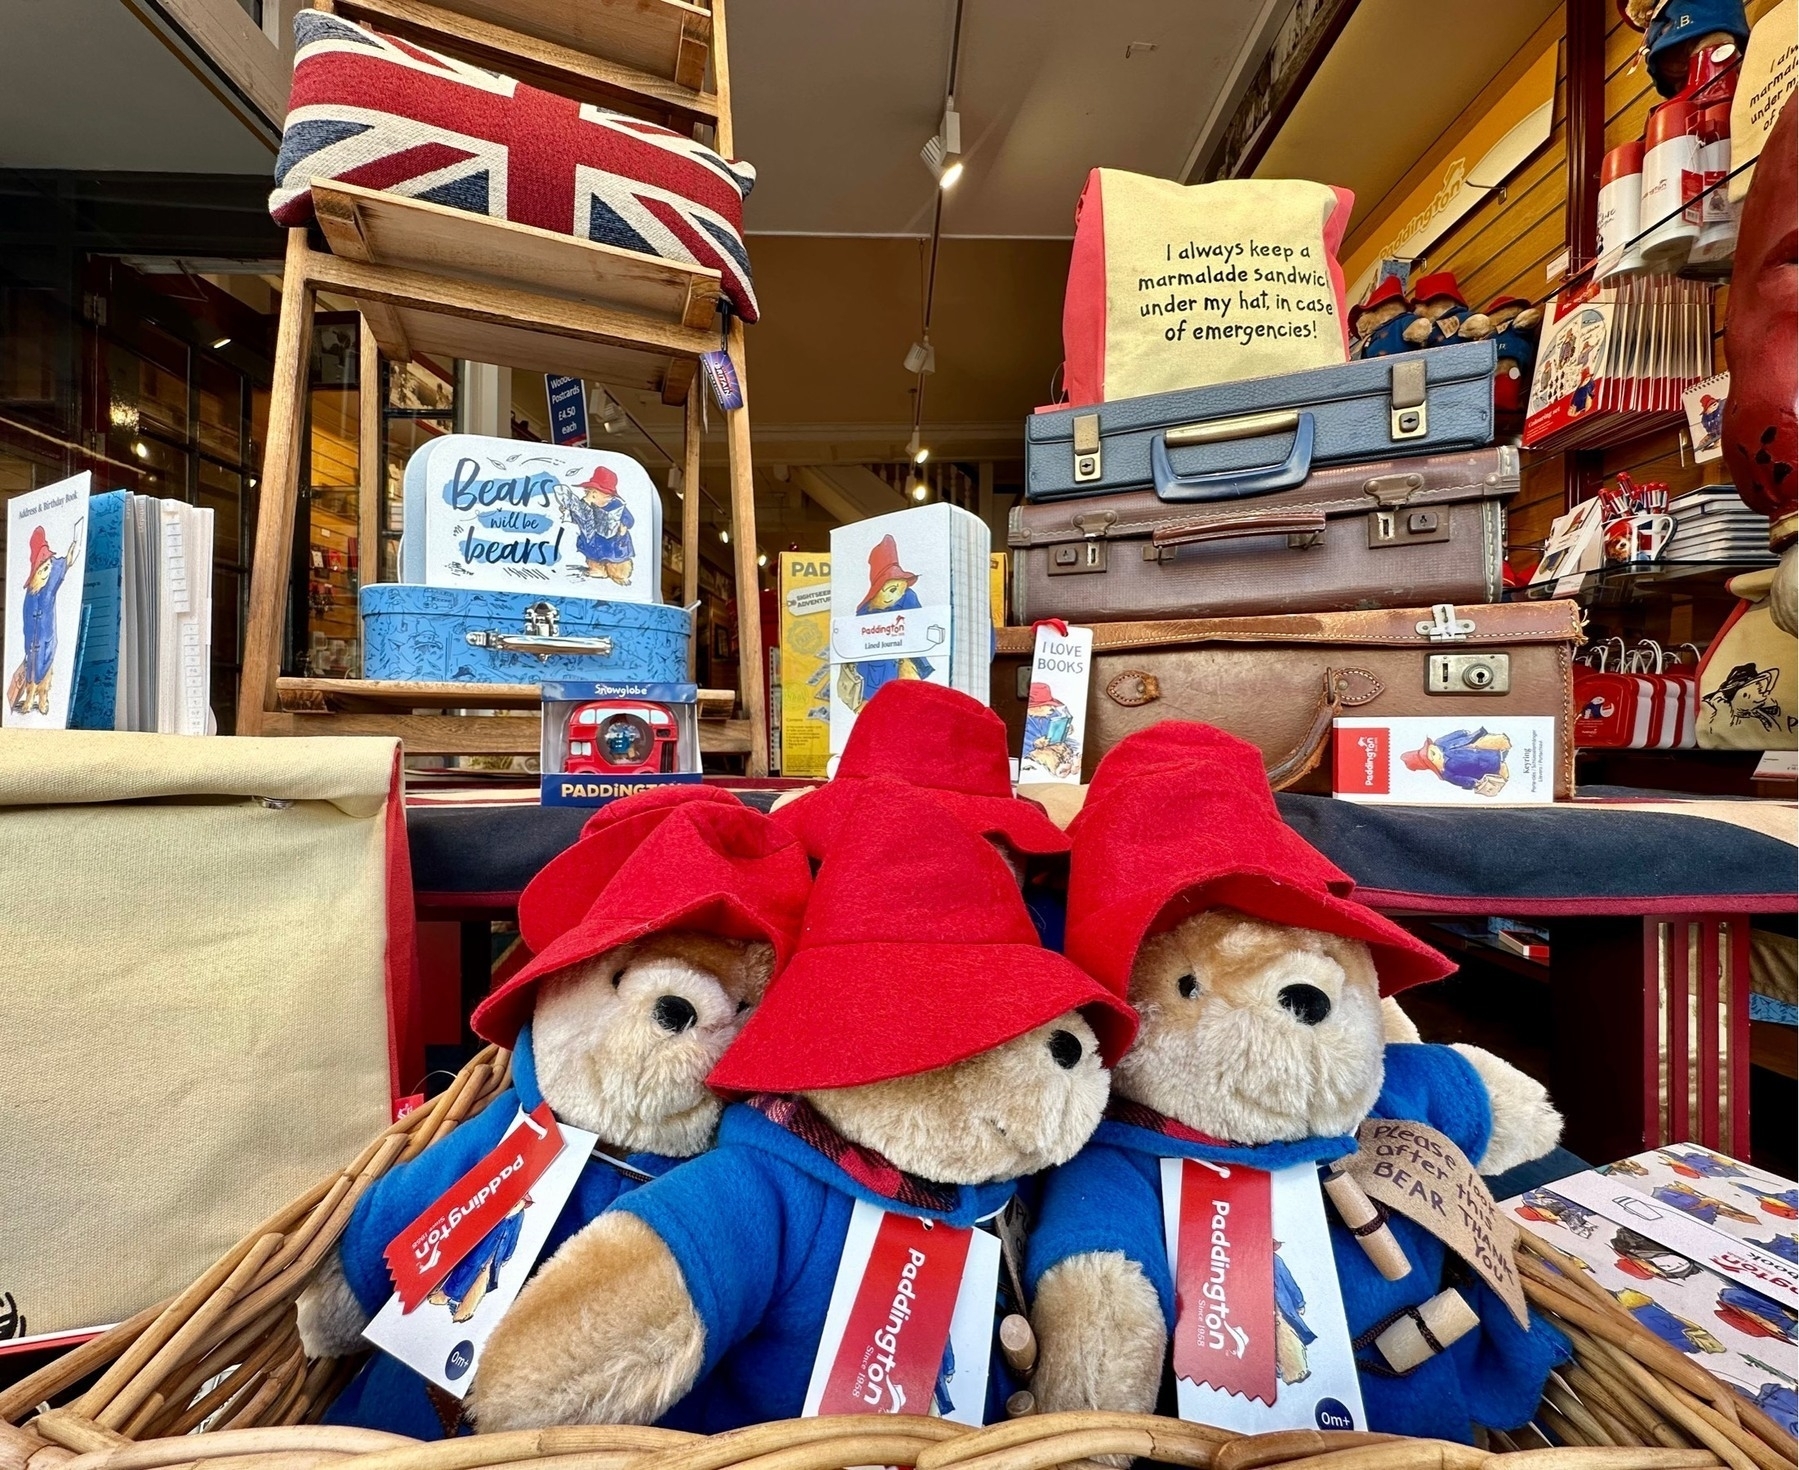 Paddington Bears front and centre, the contents of a shop window full of Paddington memorabilia, and other British products comprising the British flag